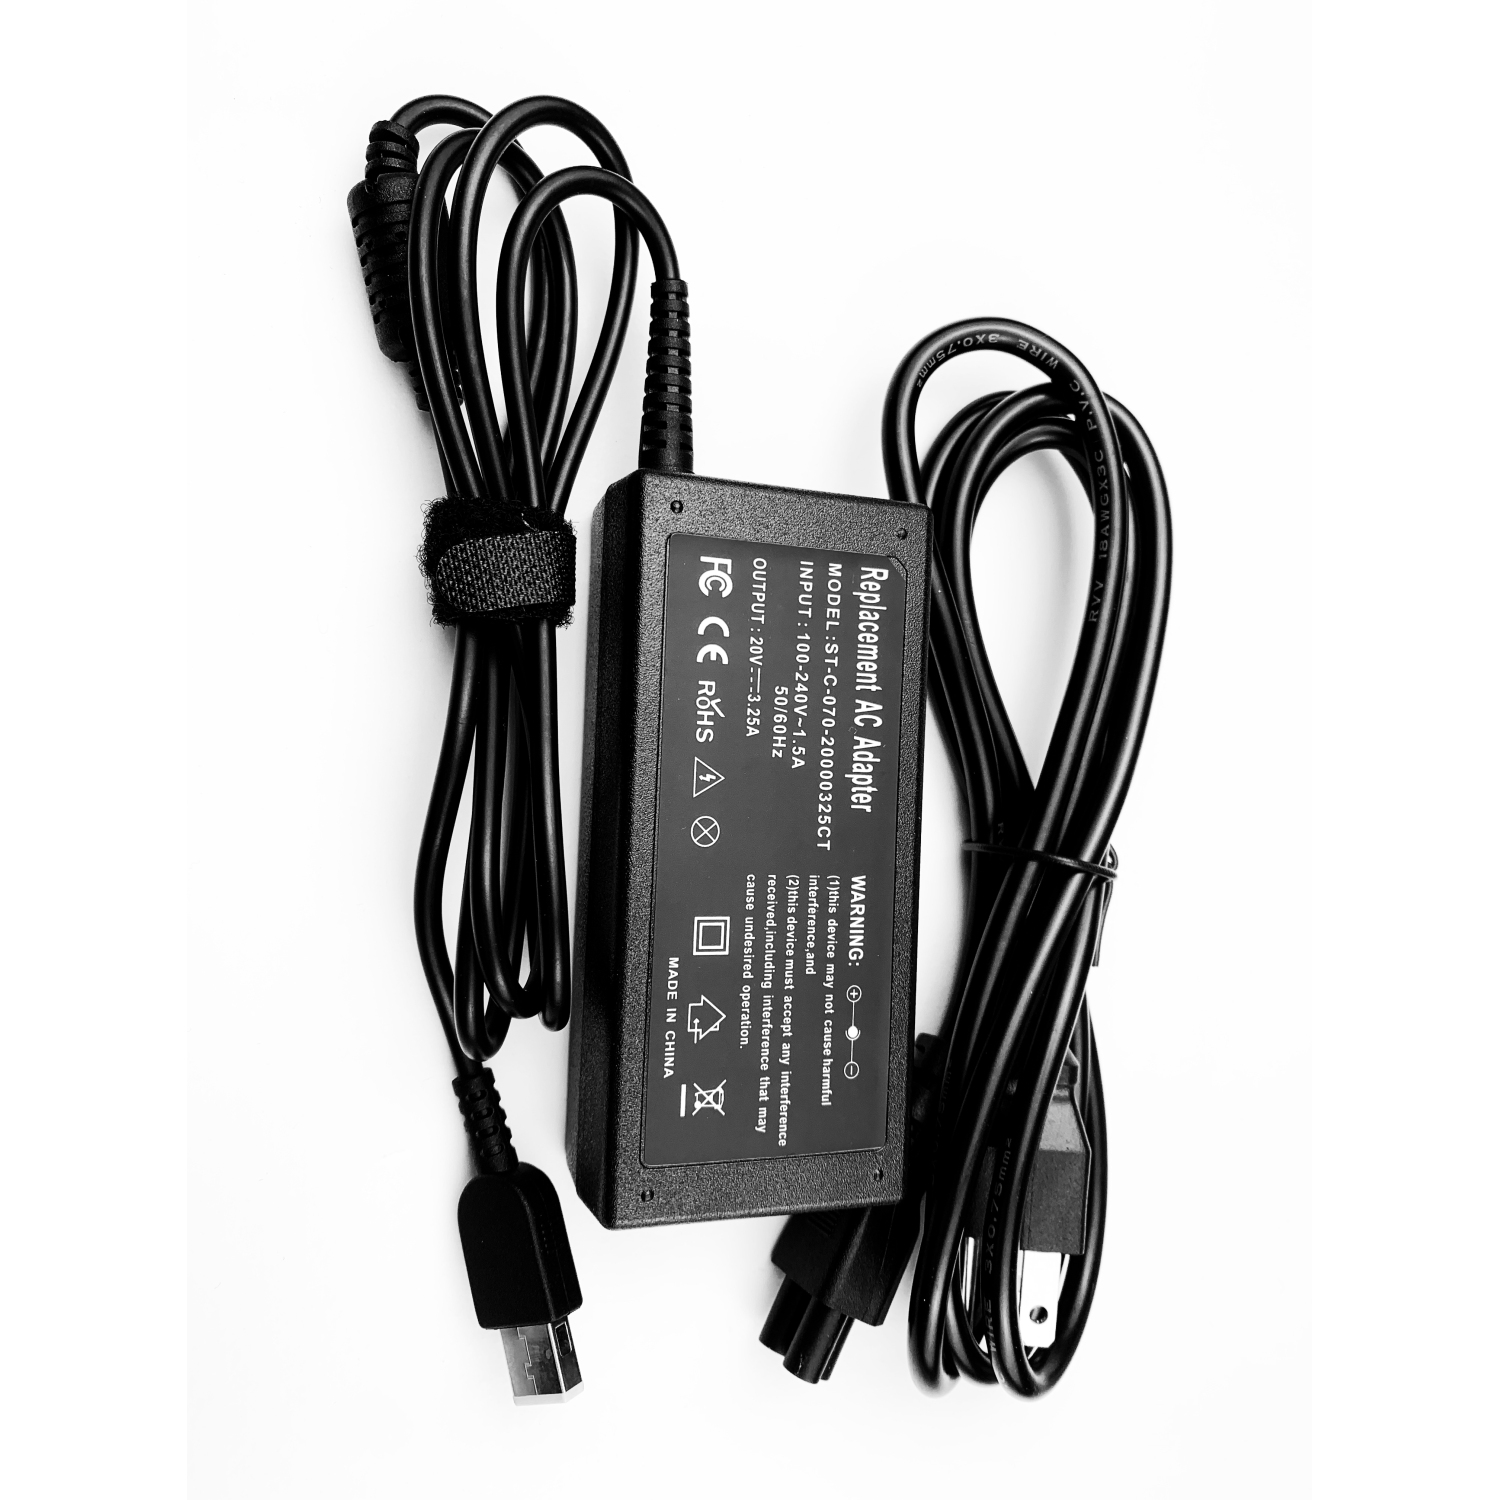 65W AC adapter charger power cord for Lenovo IdeaPad S500 S510